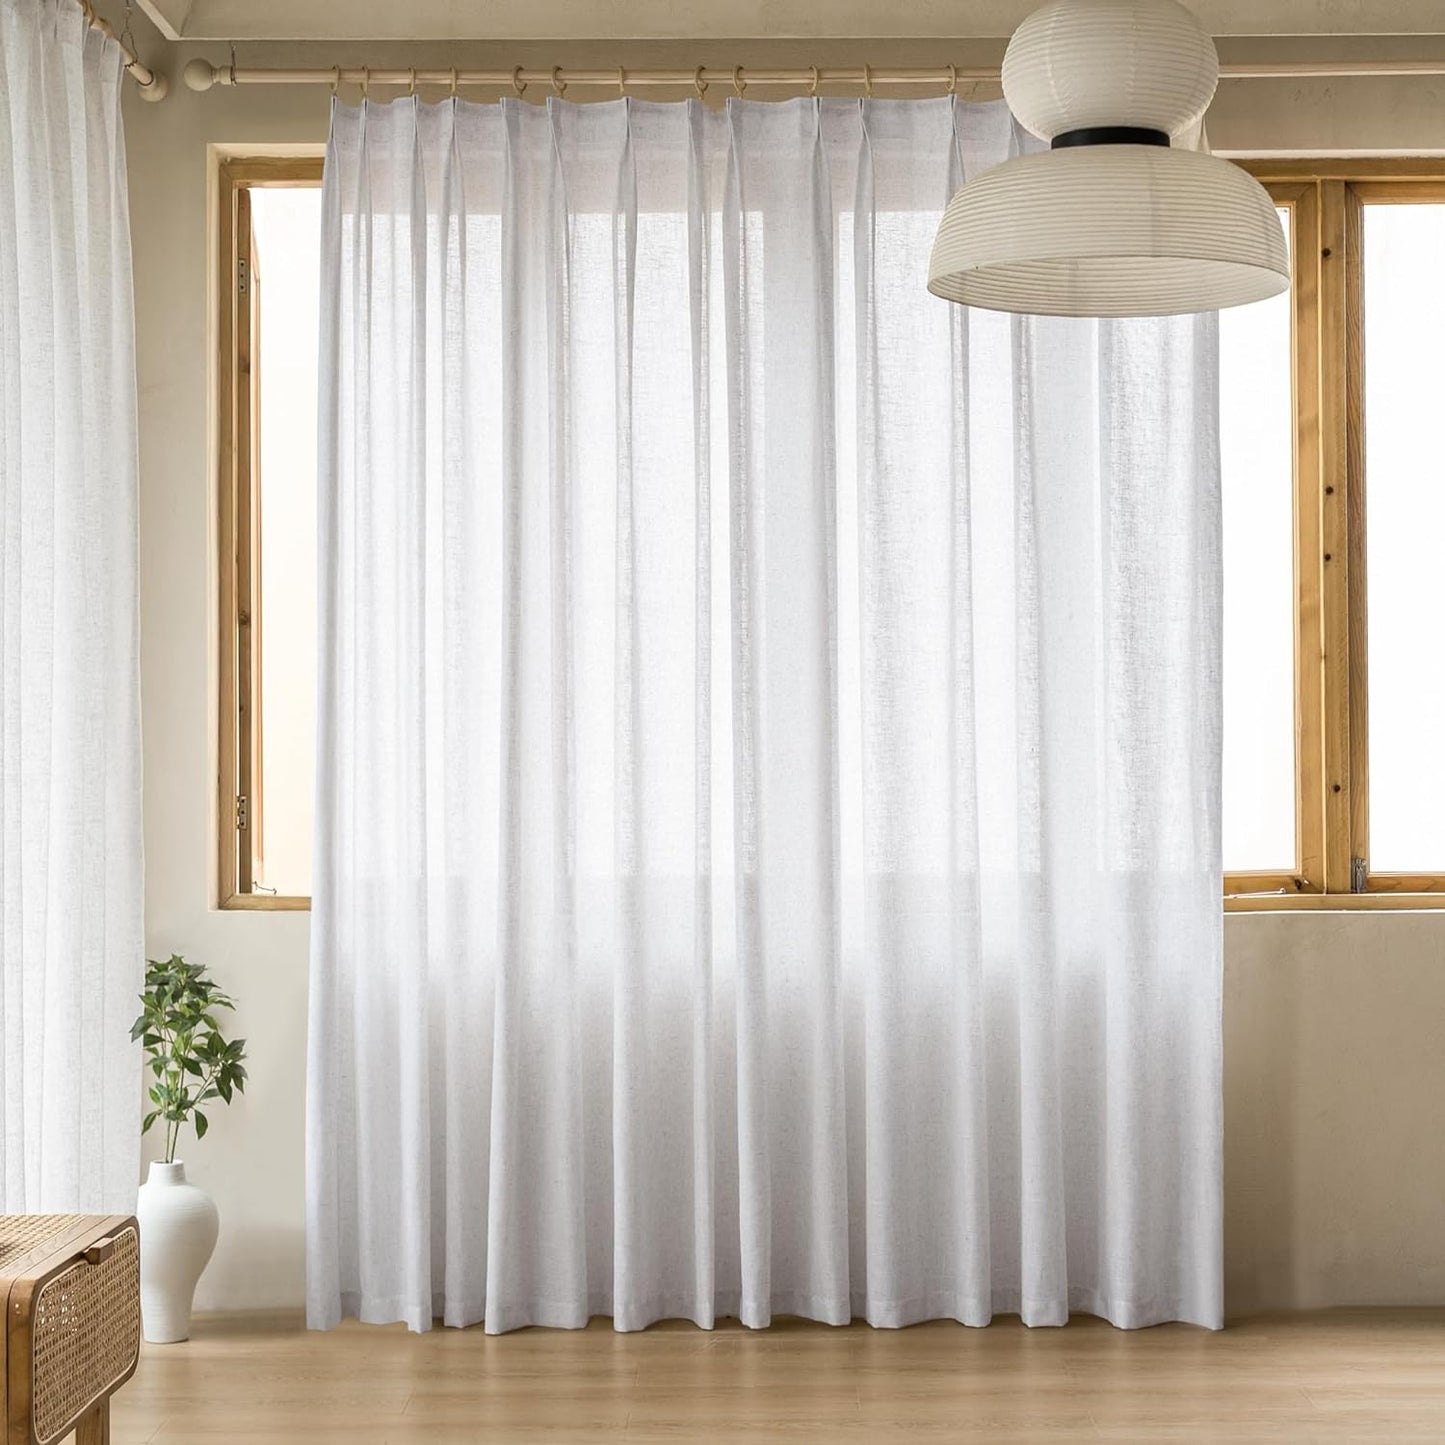 MAIHER Extra Wide Pinch Pleated Drapes 108 Inches Long, Faux Linen Light Filtering Semi Sheer Curtains with Hooks for Living Room Bedroom, Natural Linen (1 Panel, 100 W X 108 L)  MAIHER Beige White 54X80 